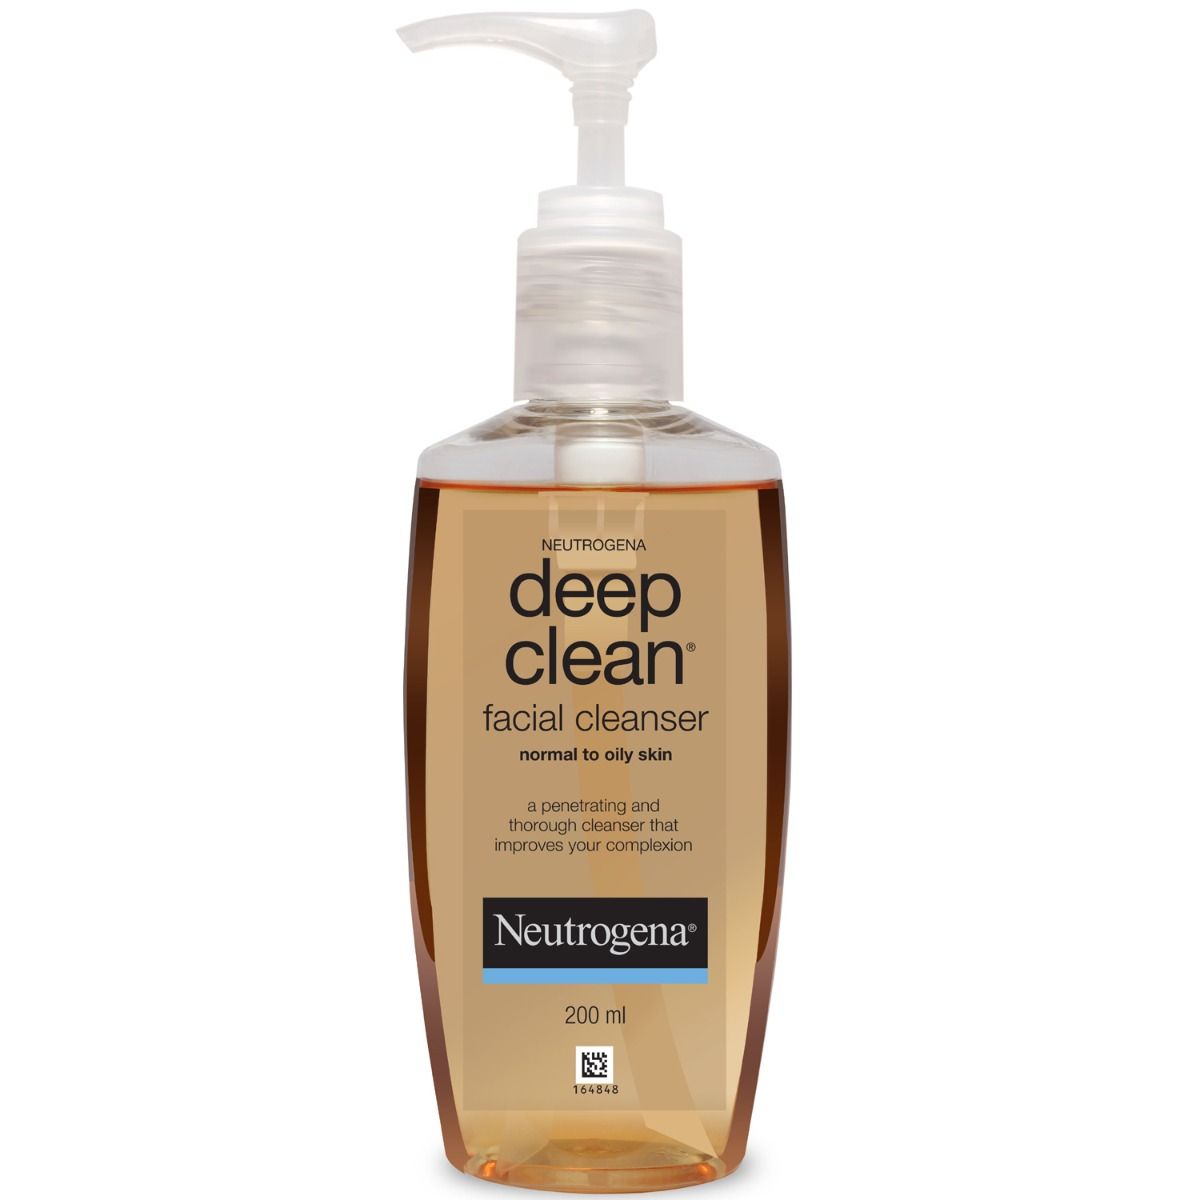 Buy Neutrogena Deep Clean Facial Cleanser For Normal to Oily Skin, 200 ml Online